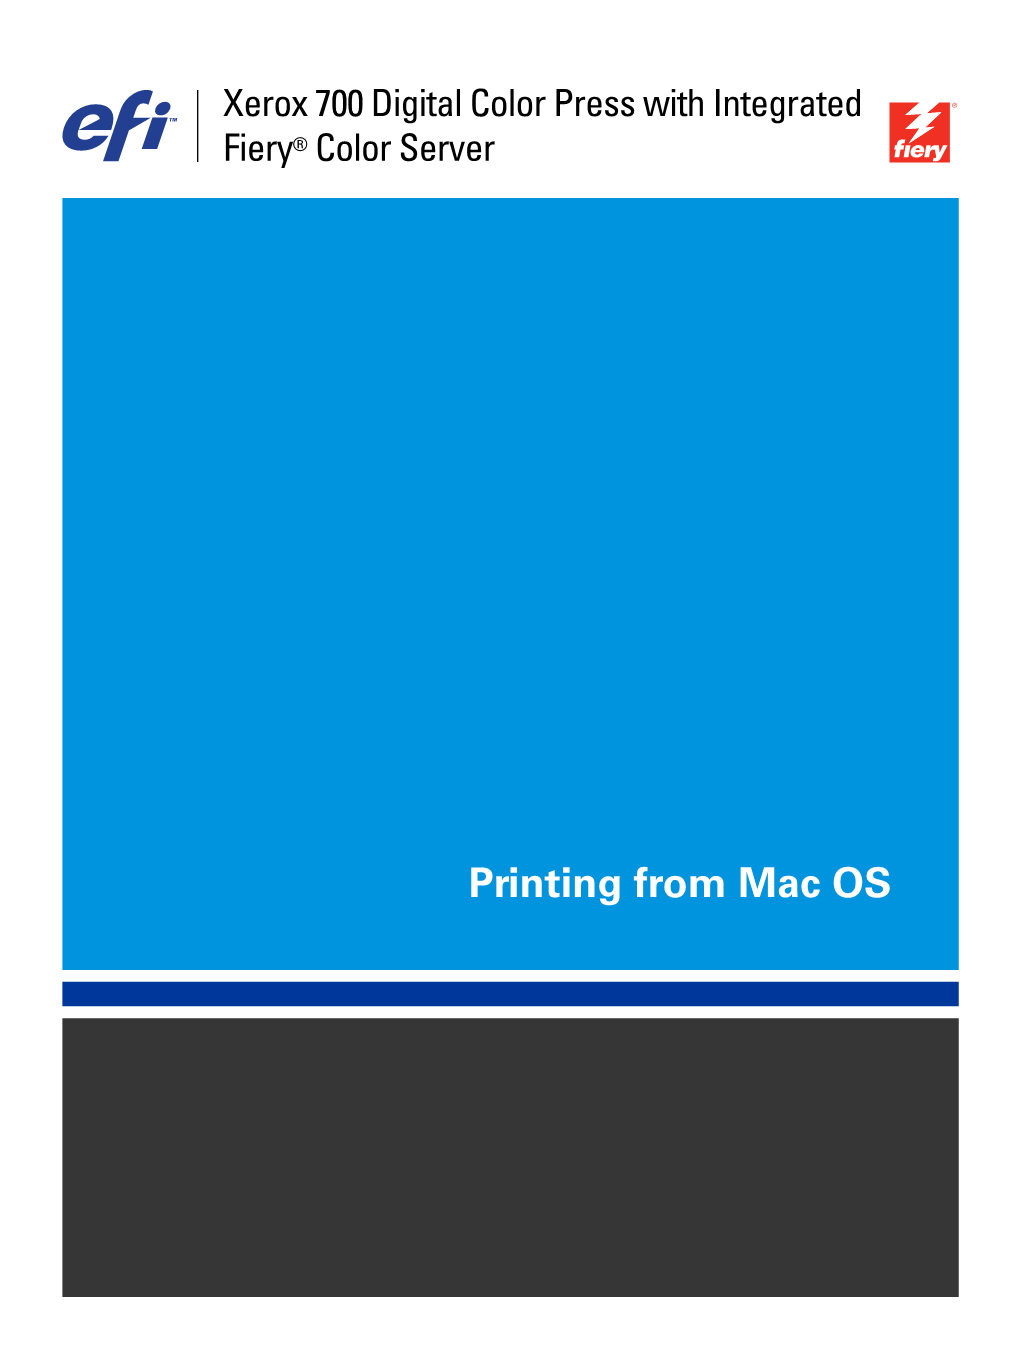 Printing from Mac OS © 2008 Electronics for Imaging, Inc